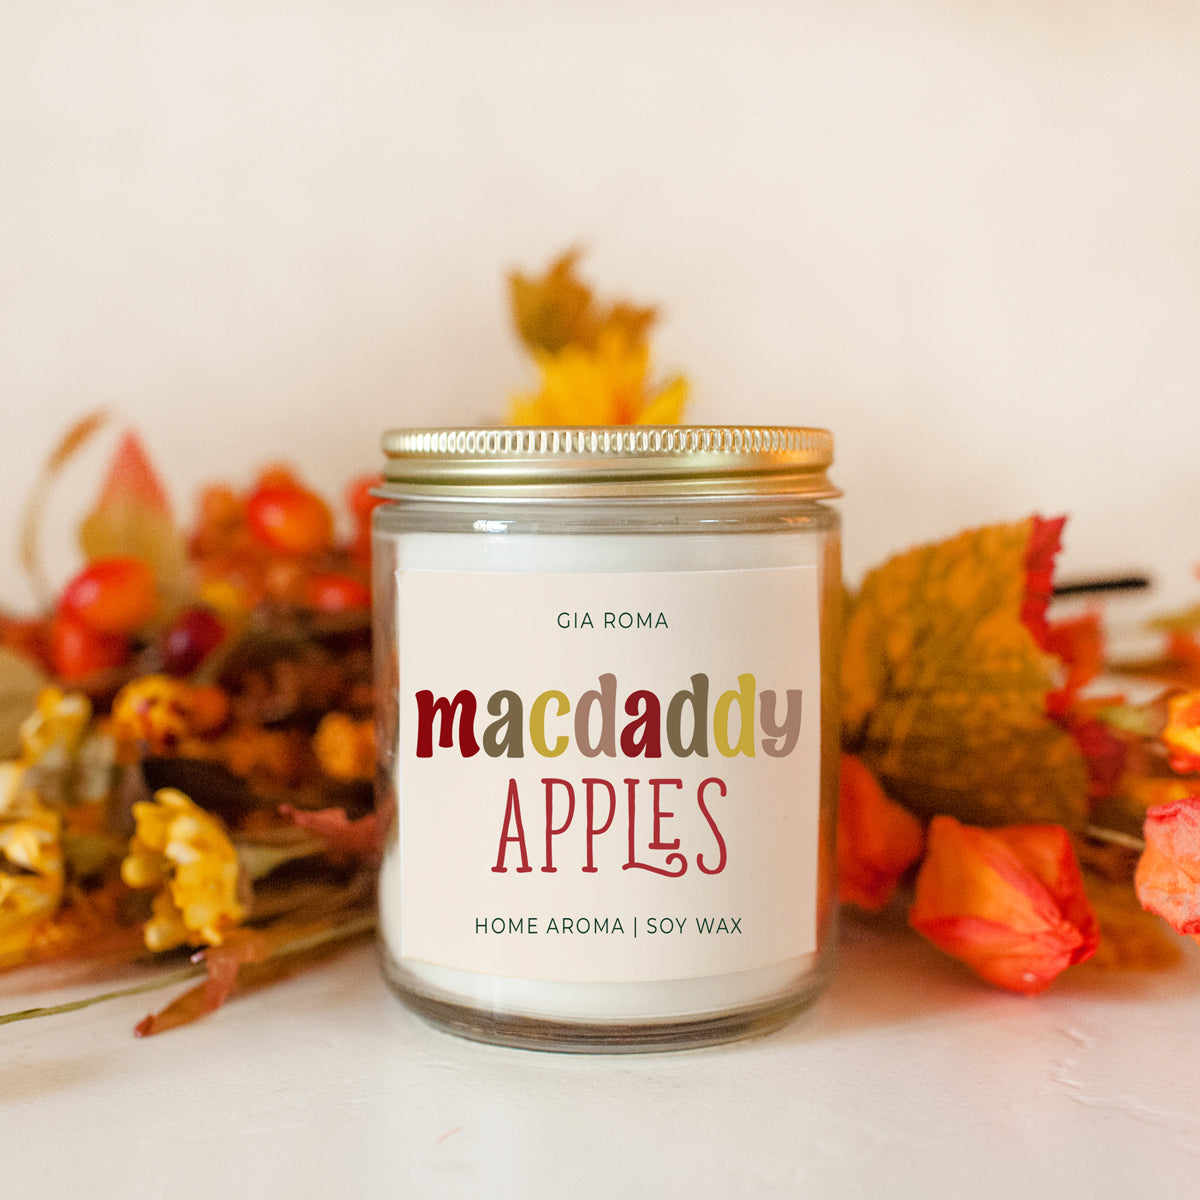 Macdaddy Apples Candle Jar for sale, Fall Scented Candles